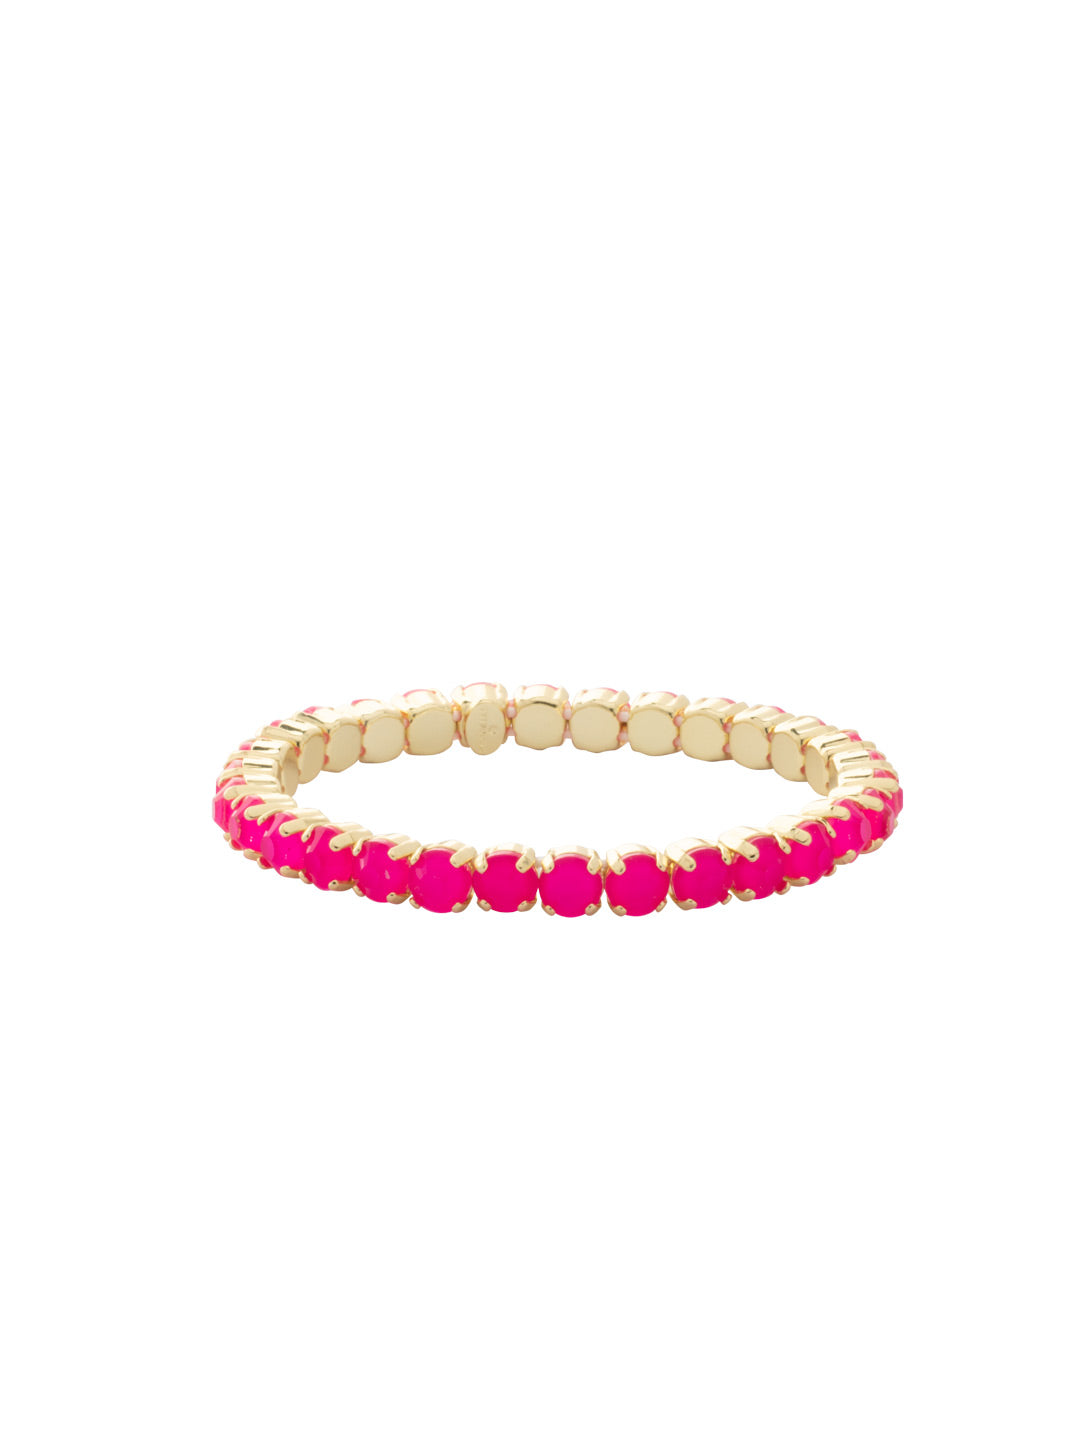 Mini Sienna Stretch Bracelet - BFD52BGWDW - <p>The Mini Sienna Stretch Bracelet is a mini take on a bestselling style! The Mini Sienna Stretch Bracelet features a line of small round crystals on a sturdy jewelers' filament, stretching to fit most wrists comfortably, without the hassle of a clasp! From Sorrelli's Wild Watermelon collection in our Bright Gold-tone finish.</p>